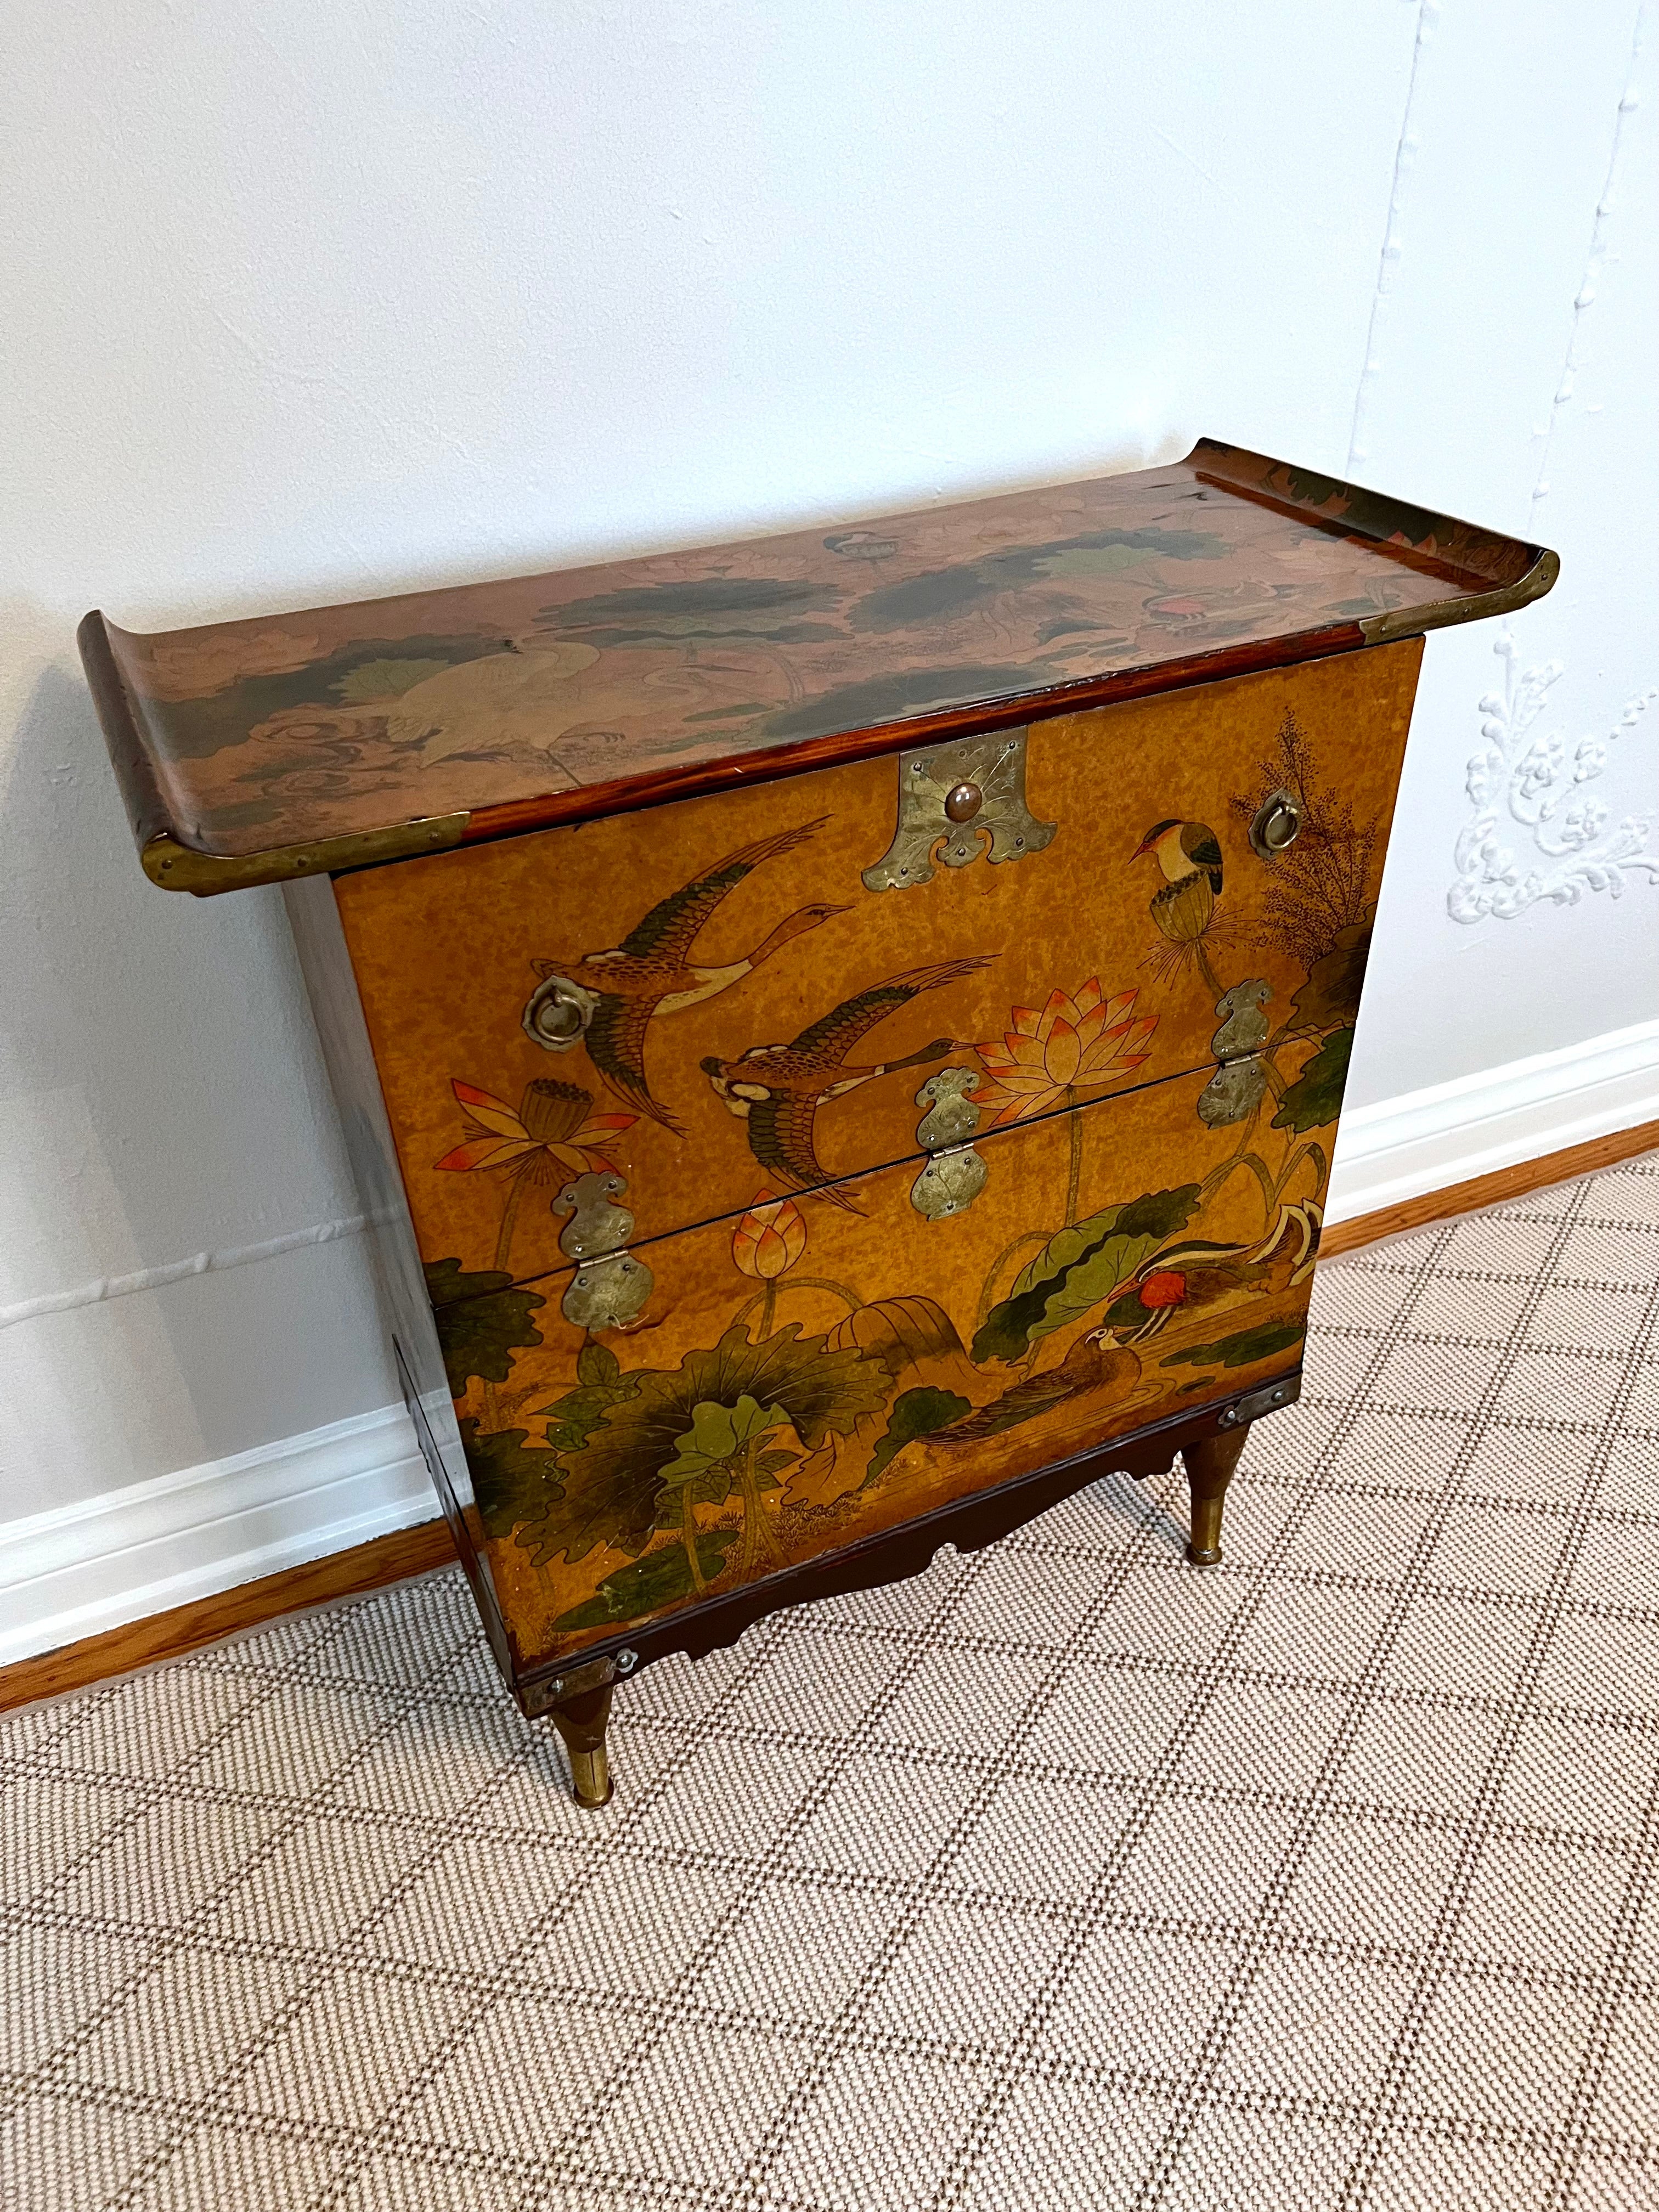 Beautiful Asian cabinet featuring upturned corners and Chinese script lining the interior. The top and front surfaces feature hand-pained lotus and bird detail for a natural scene. 

This cabinet can be used to store blankets or tall items as it